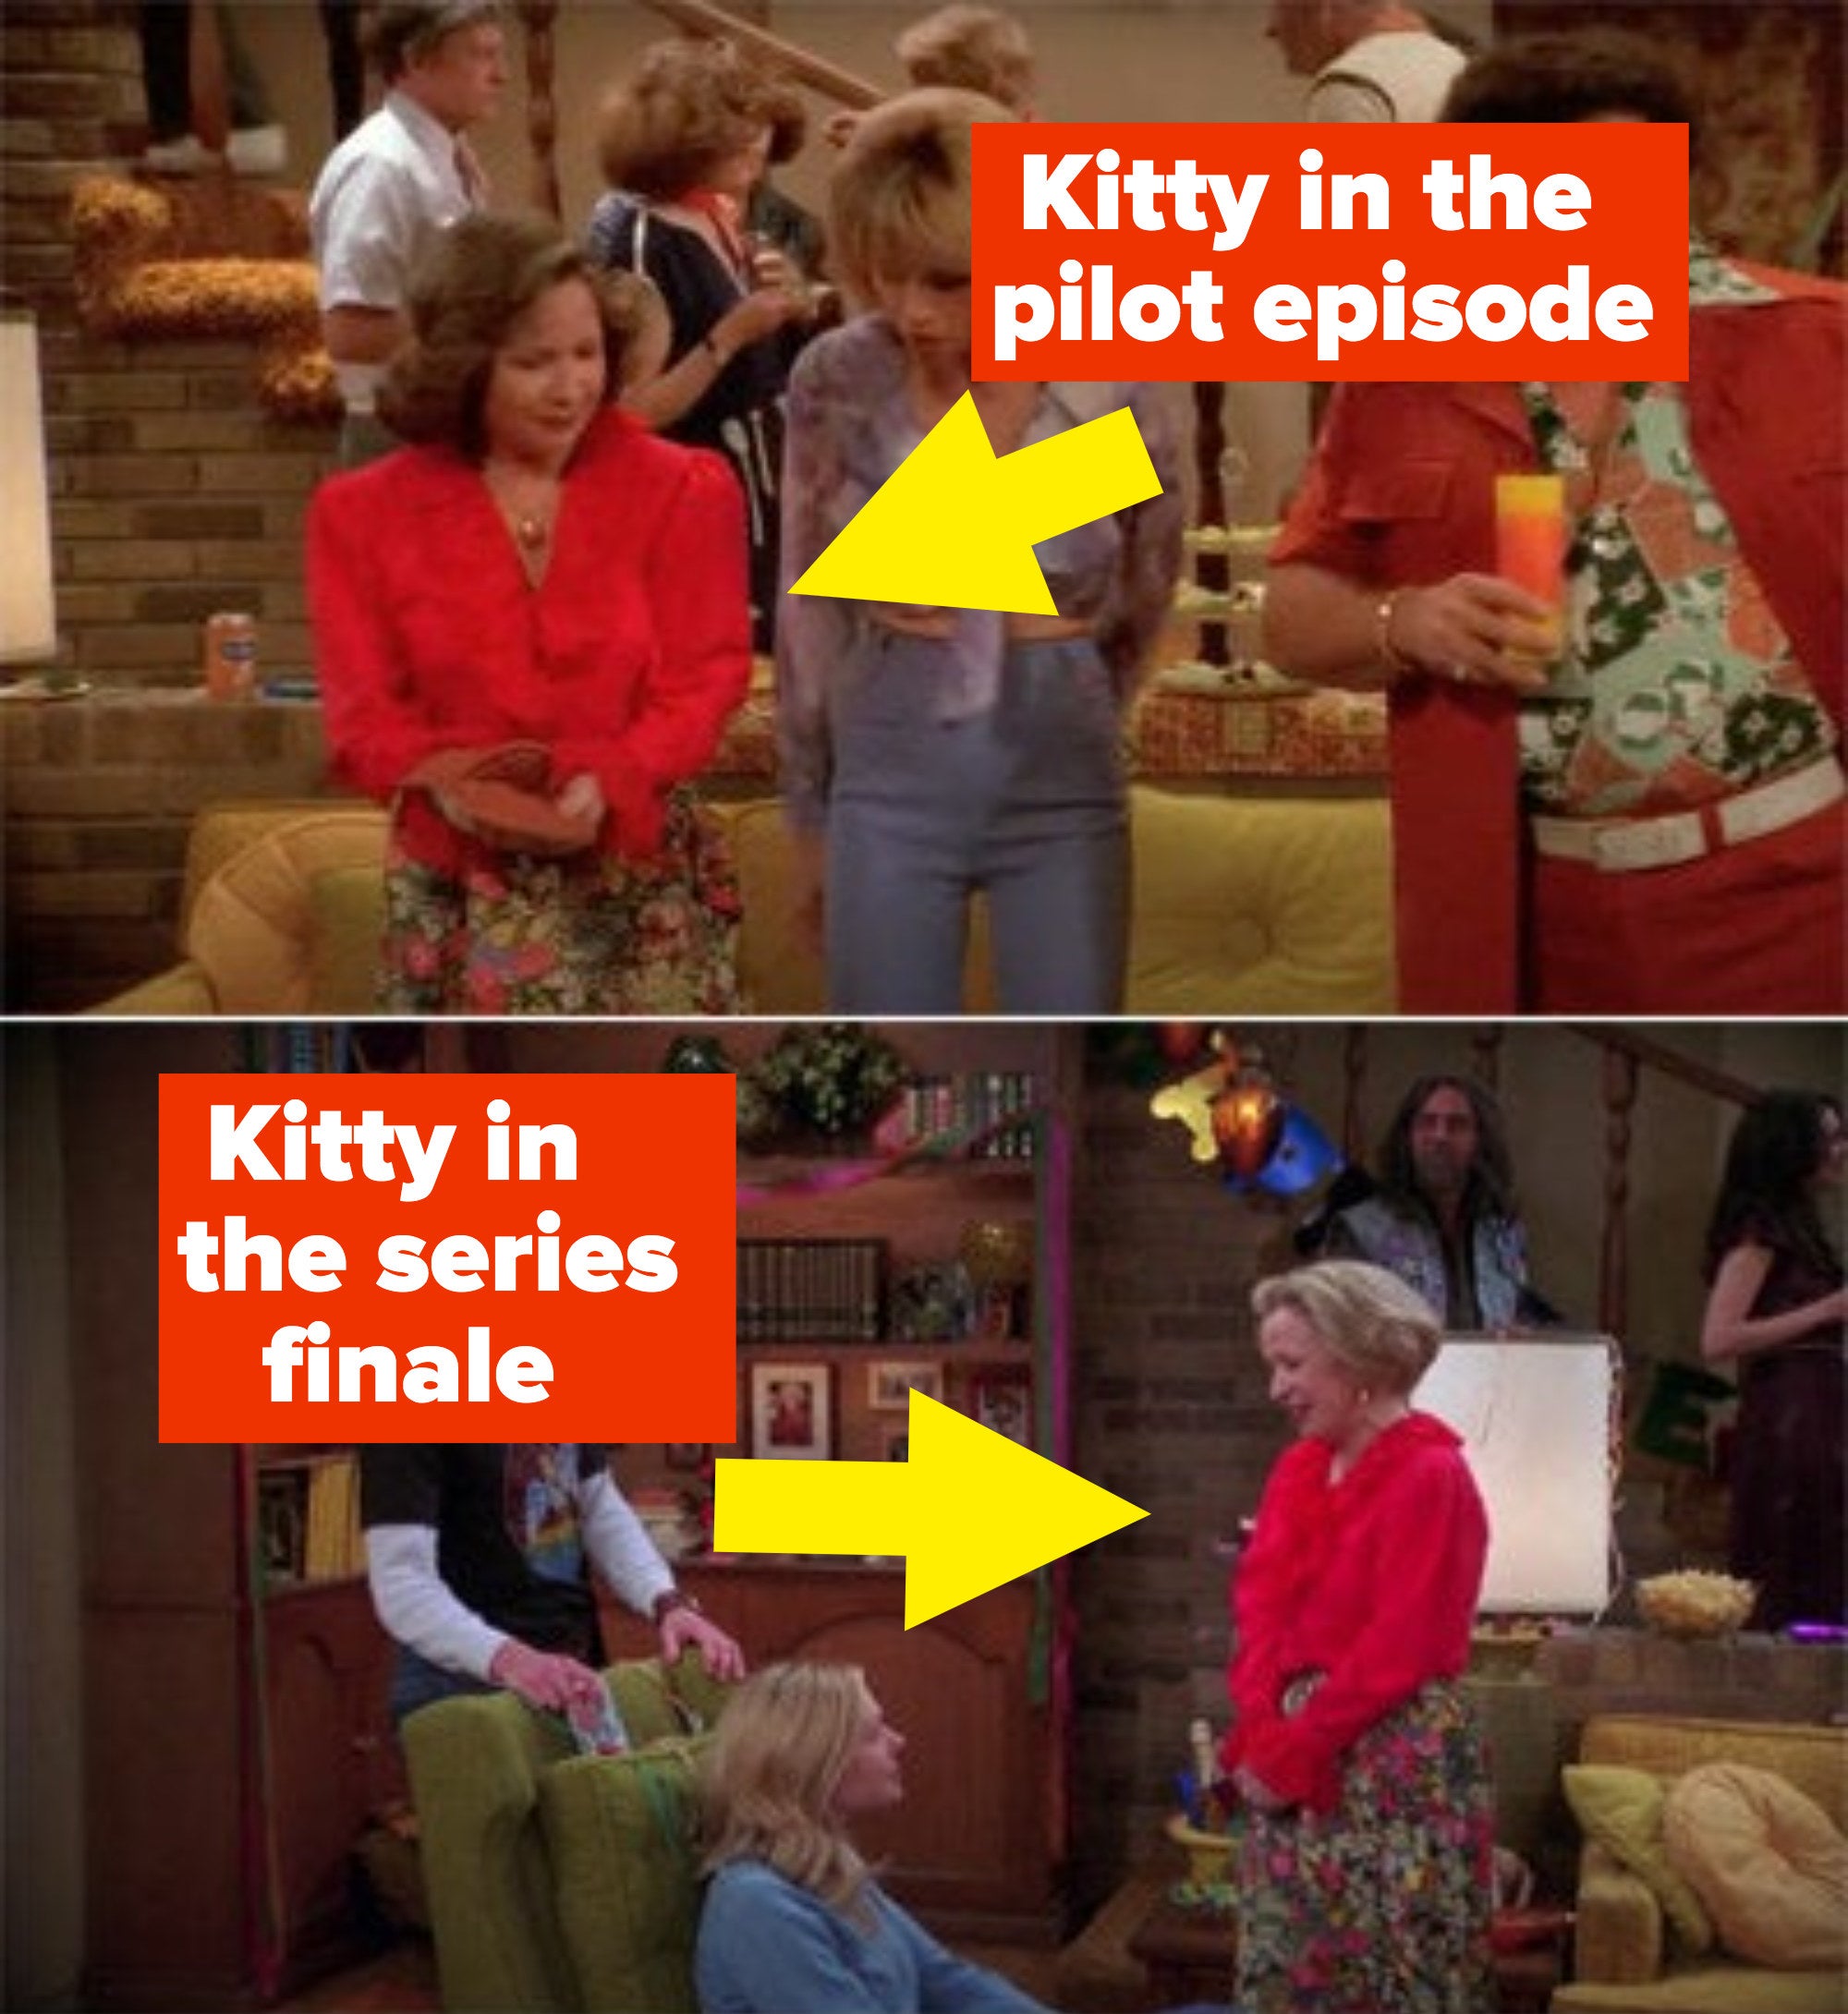 Kitty wearing the same outfit in the pilot and finale